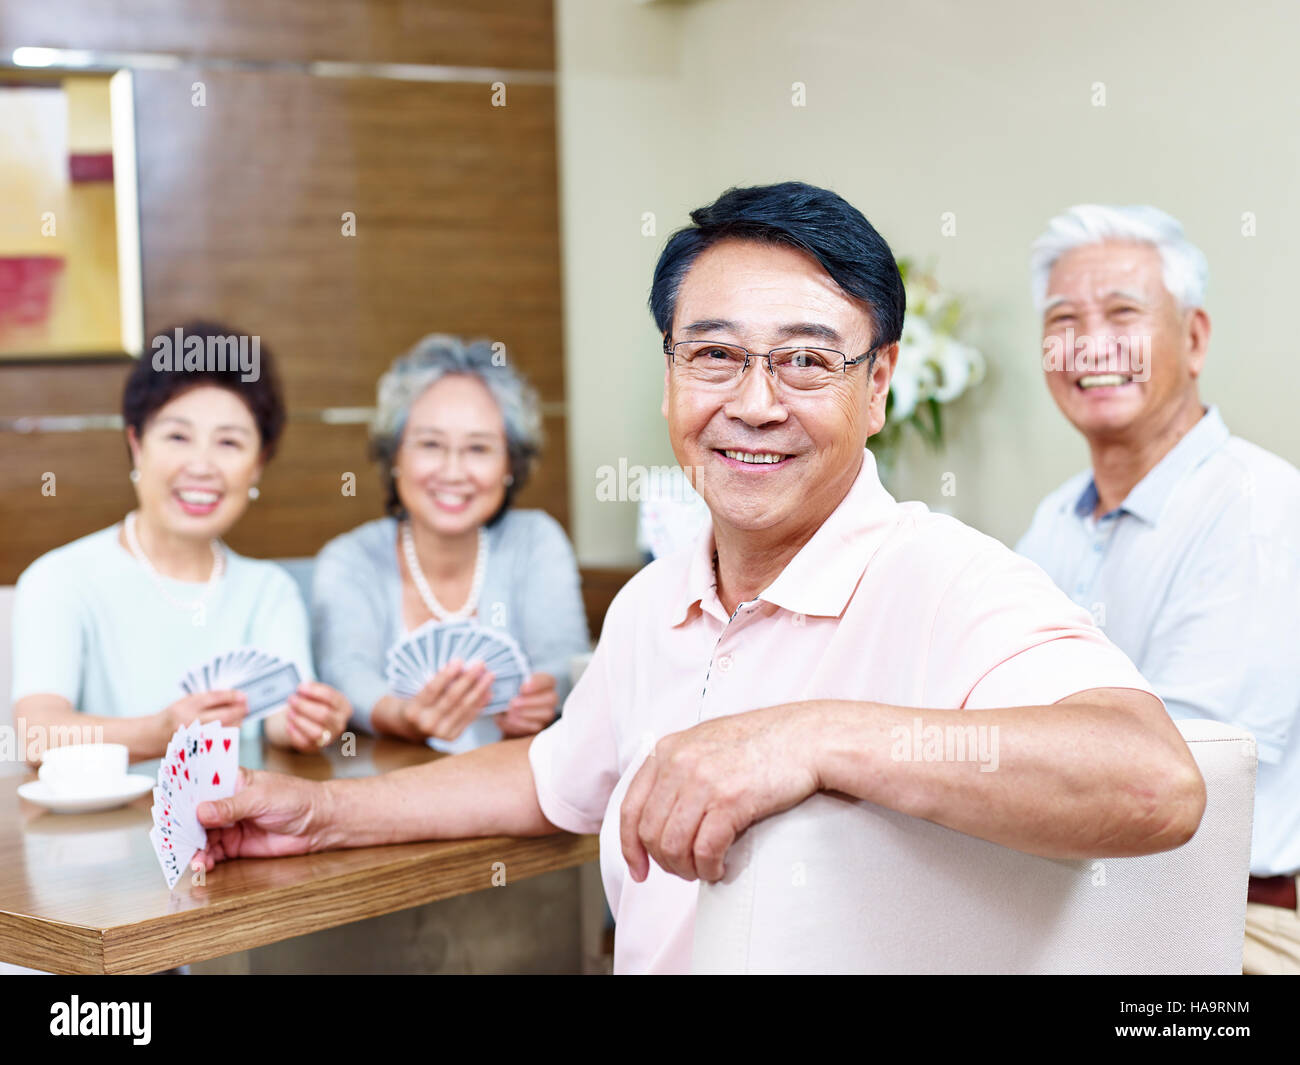 senior asian man looking at camera smiling while playing cards with friends. Stock Photo